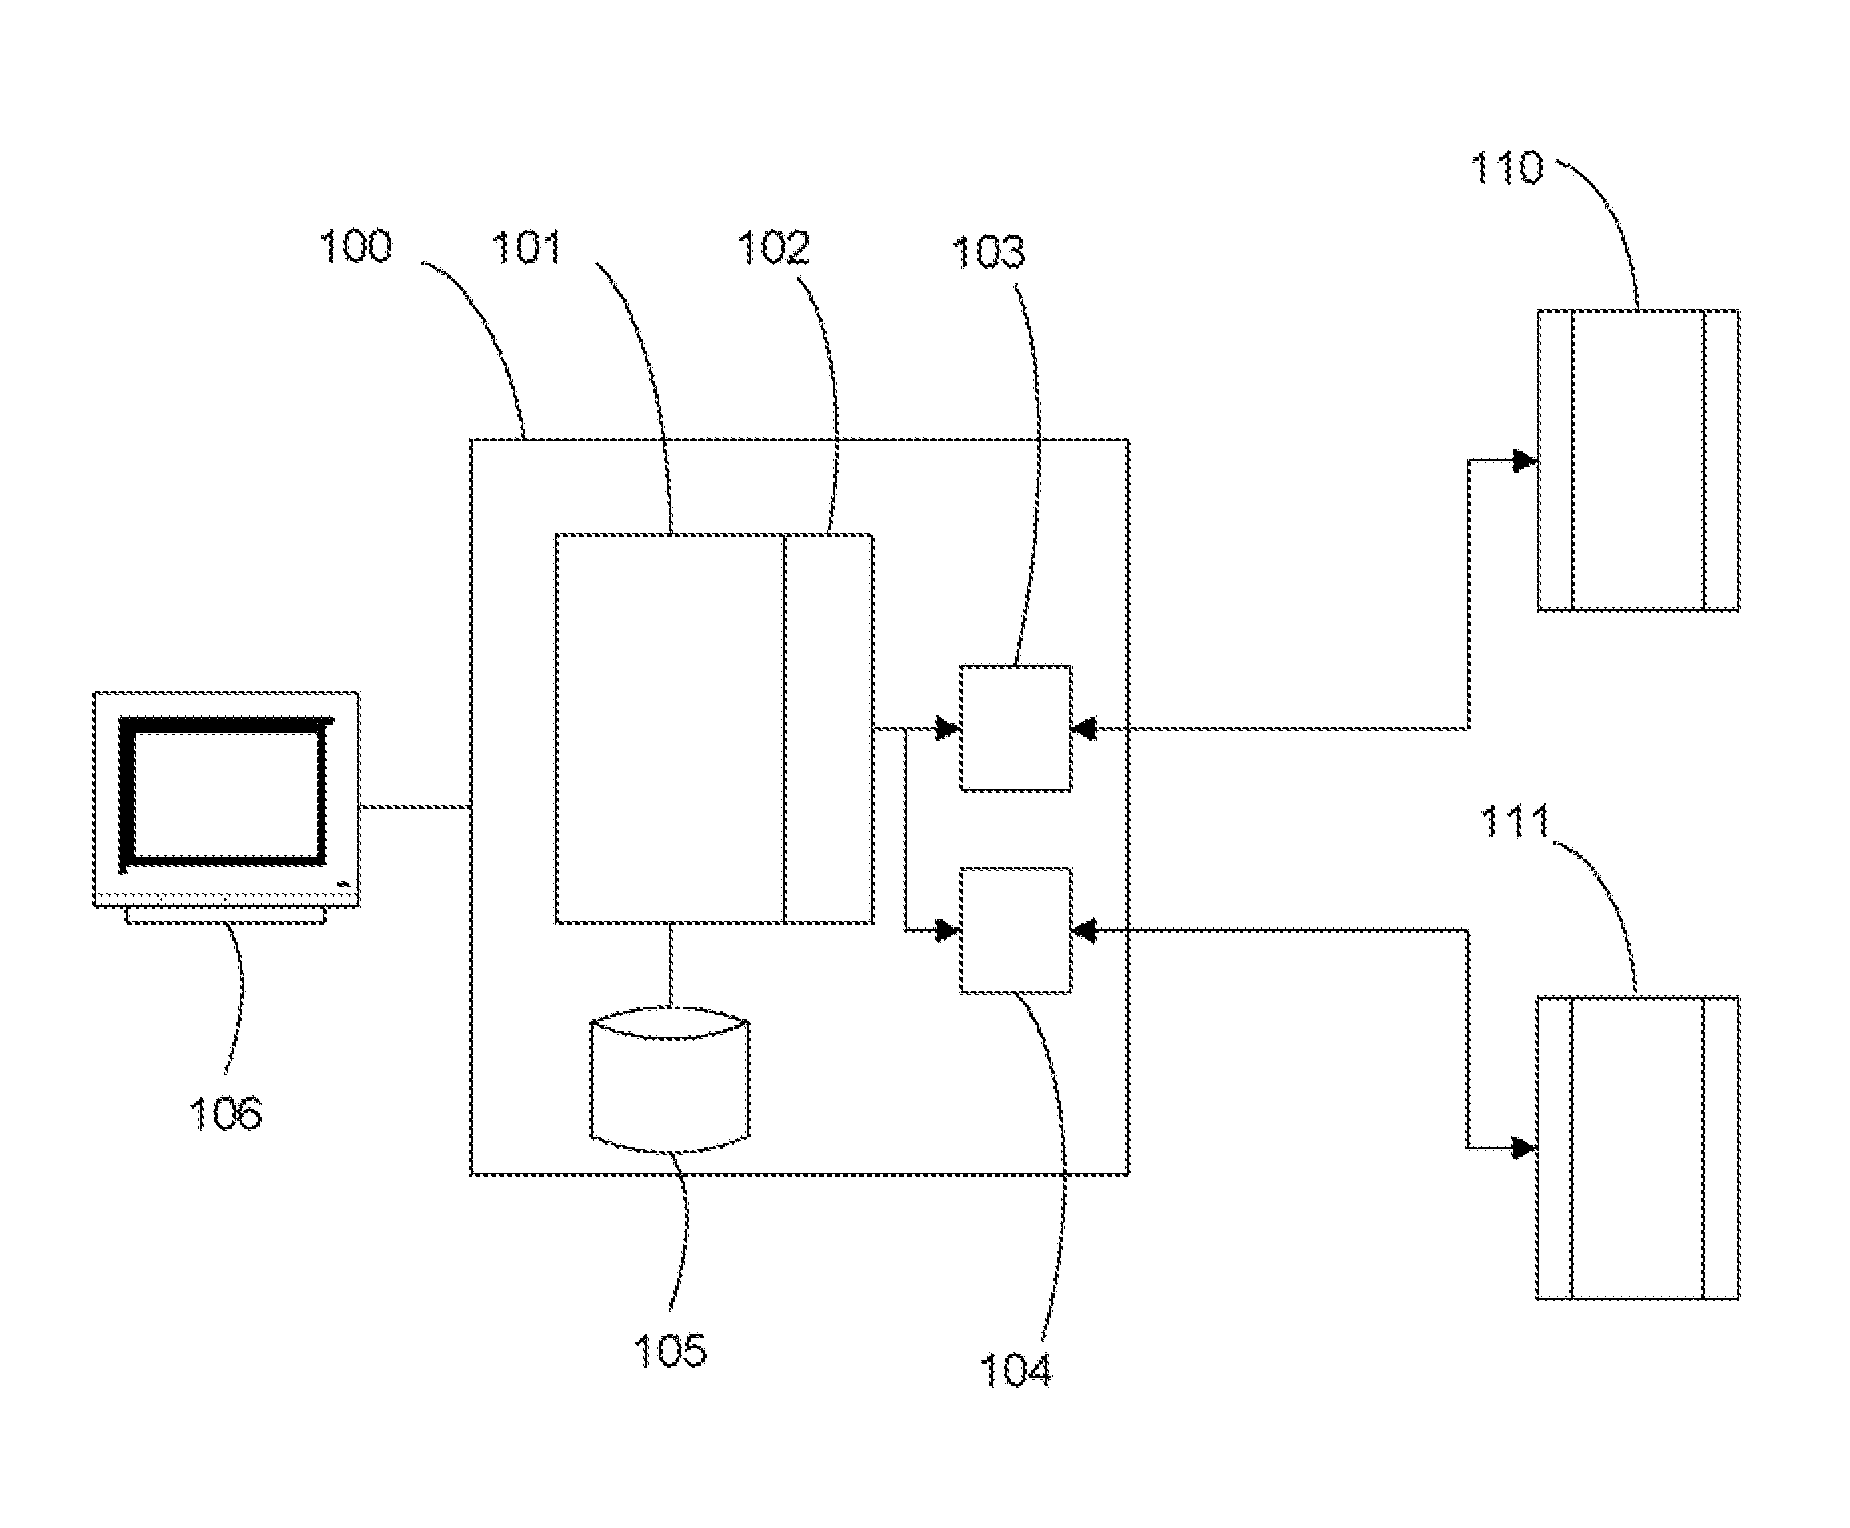 Data quality enrichment integration and evaluation system